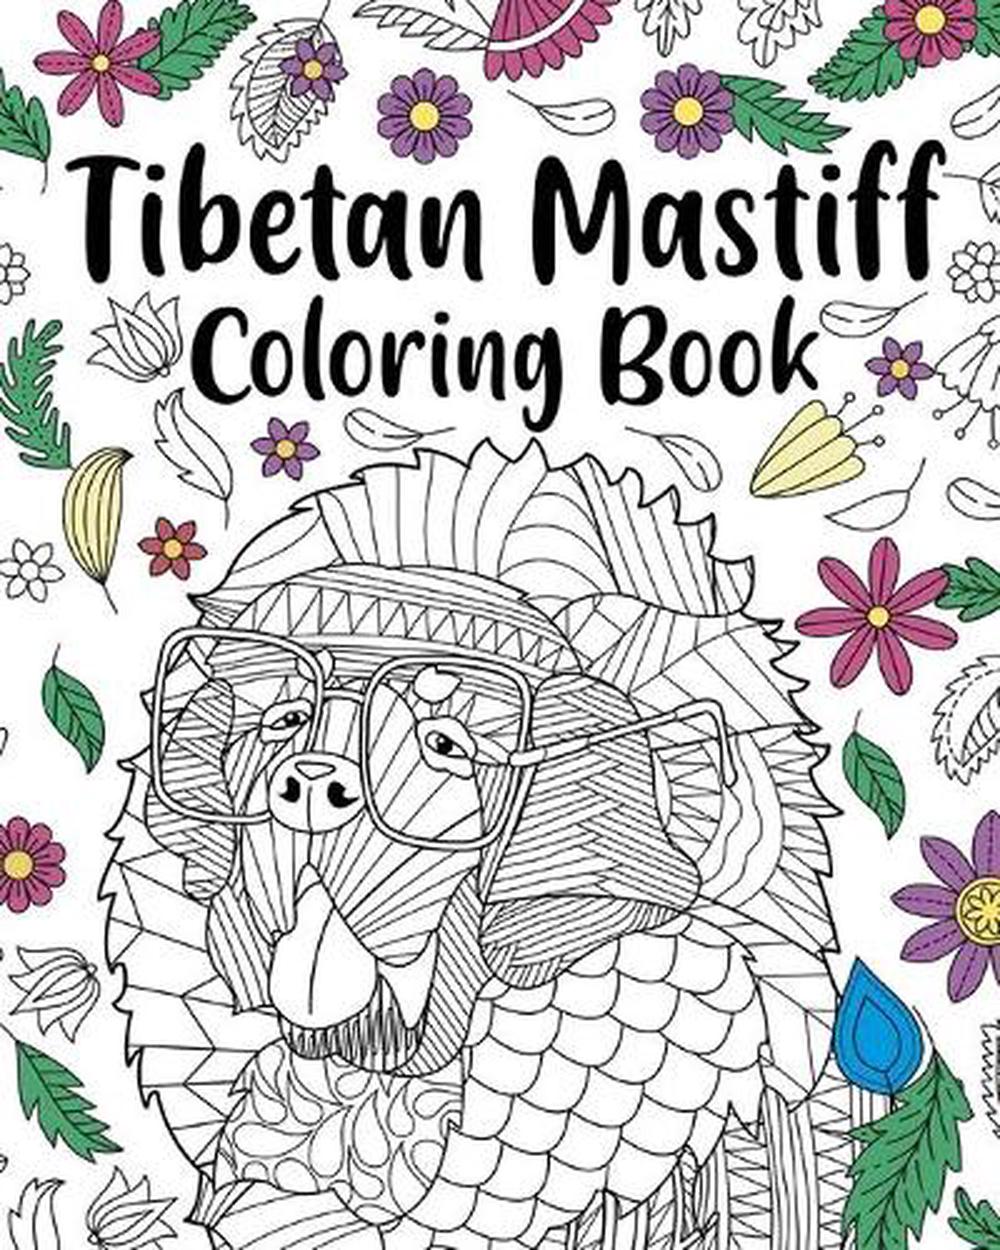 Download Tibetan Mastiff Coloring Book By Paperland Paperback 9781034837190 Buy Online At Moby The Great